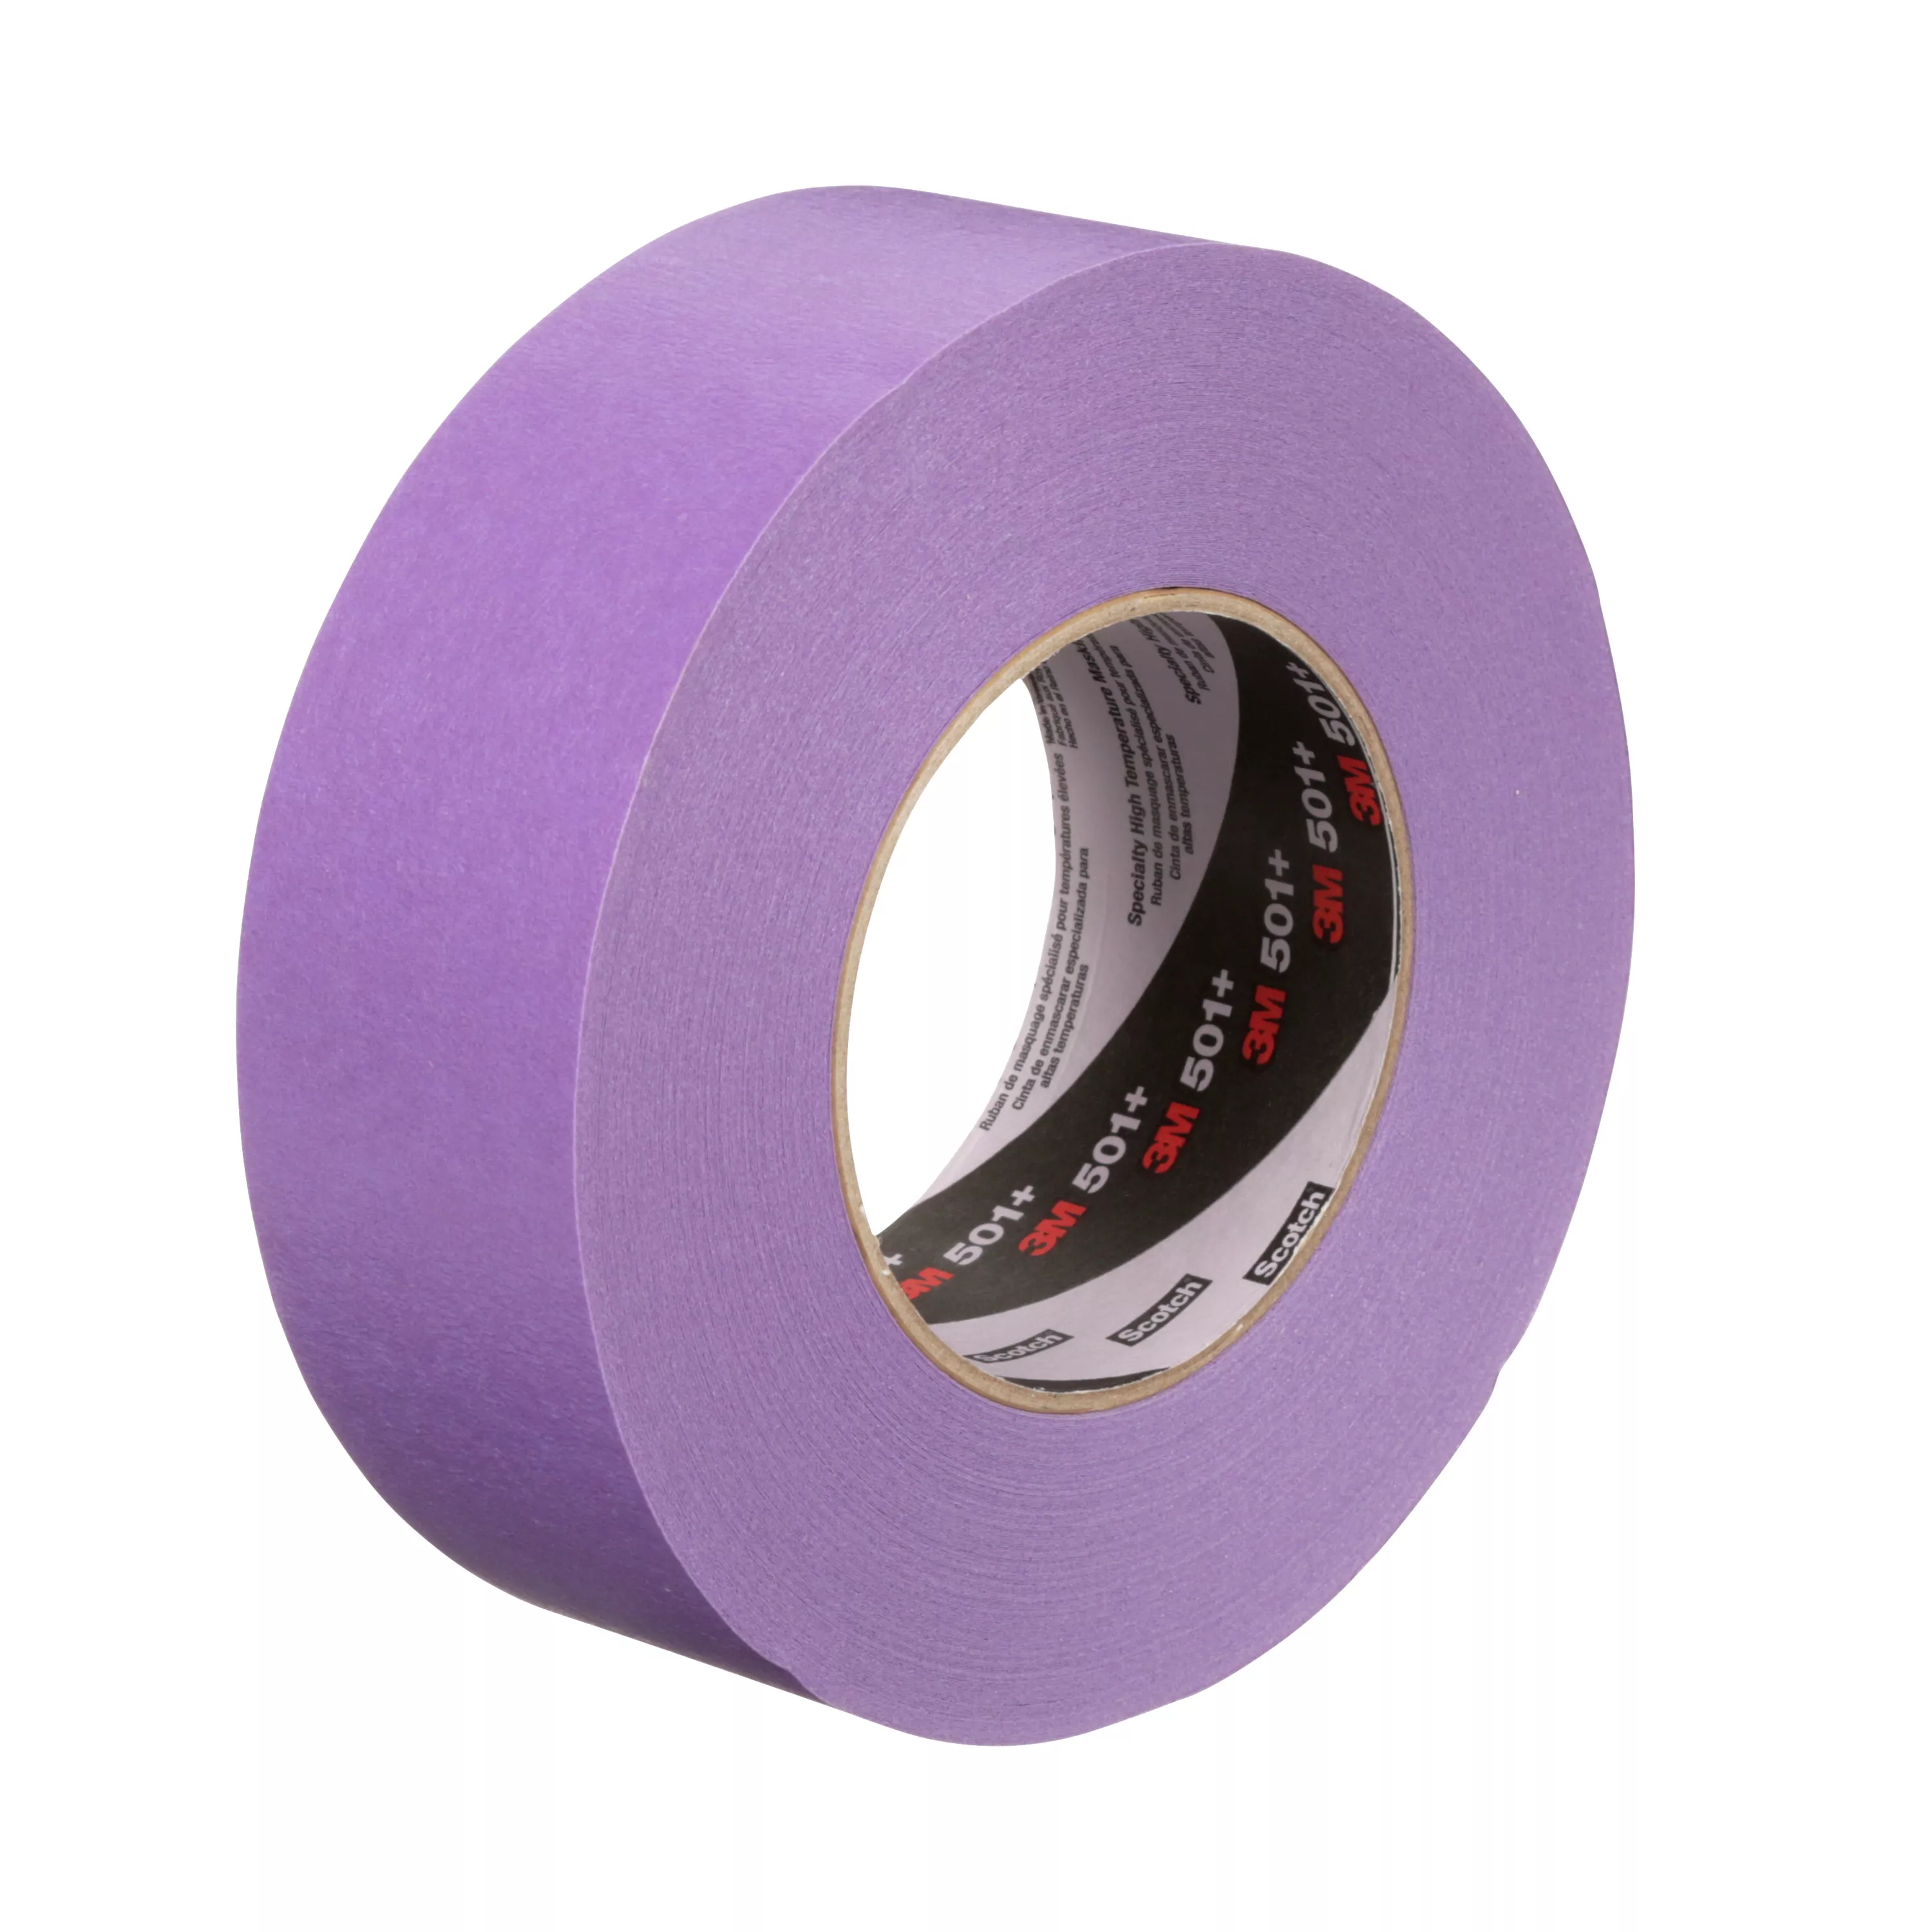 SKU 7100086192 | 3M™ Specialty High Temperature Masking Tape 501+